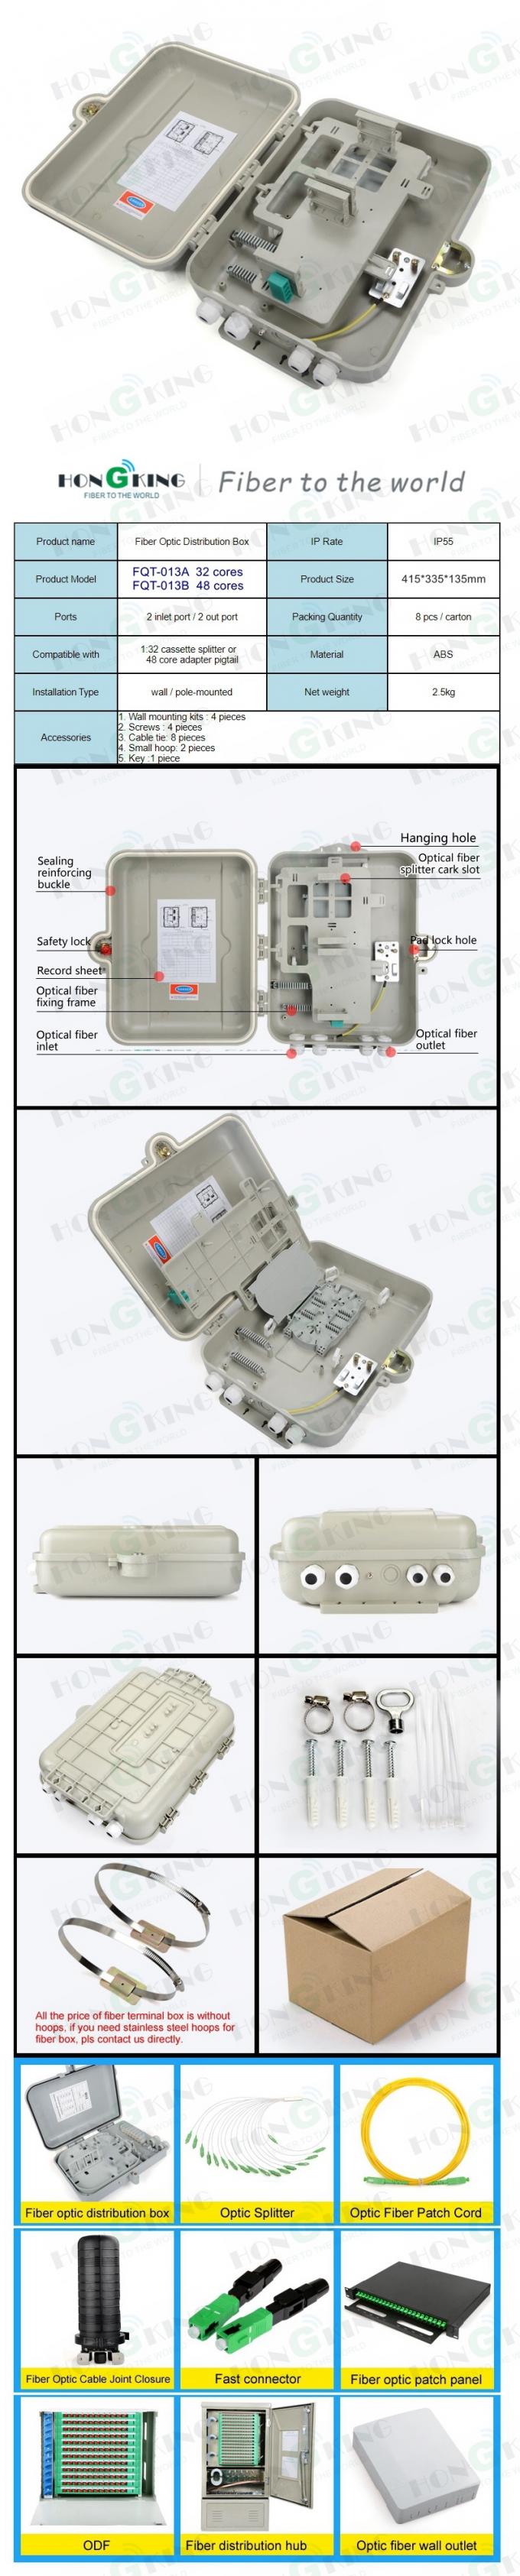 32cores FTTH Optical Fiber Distribution Box with Splitter 1X32